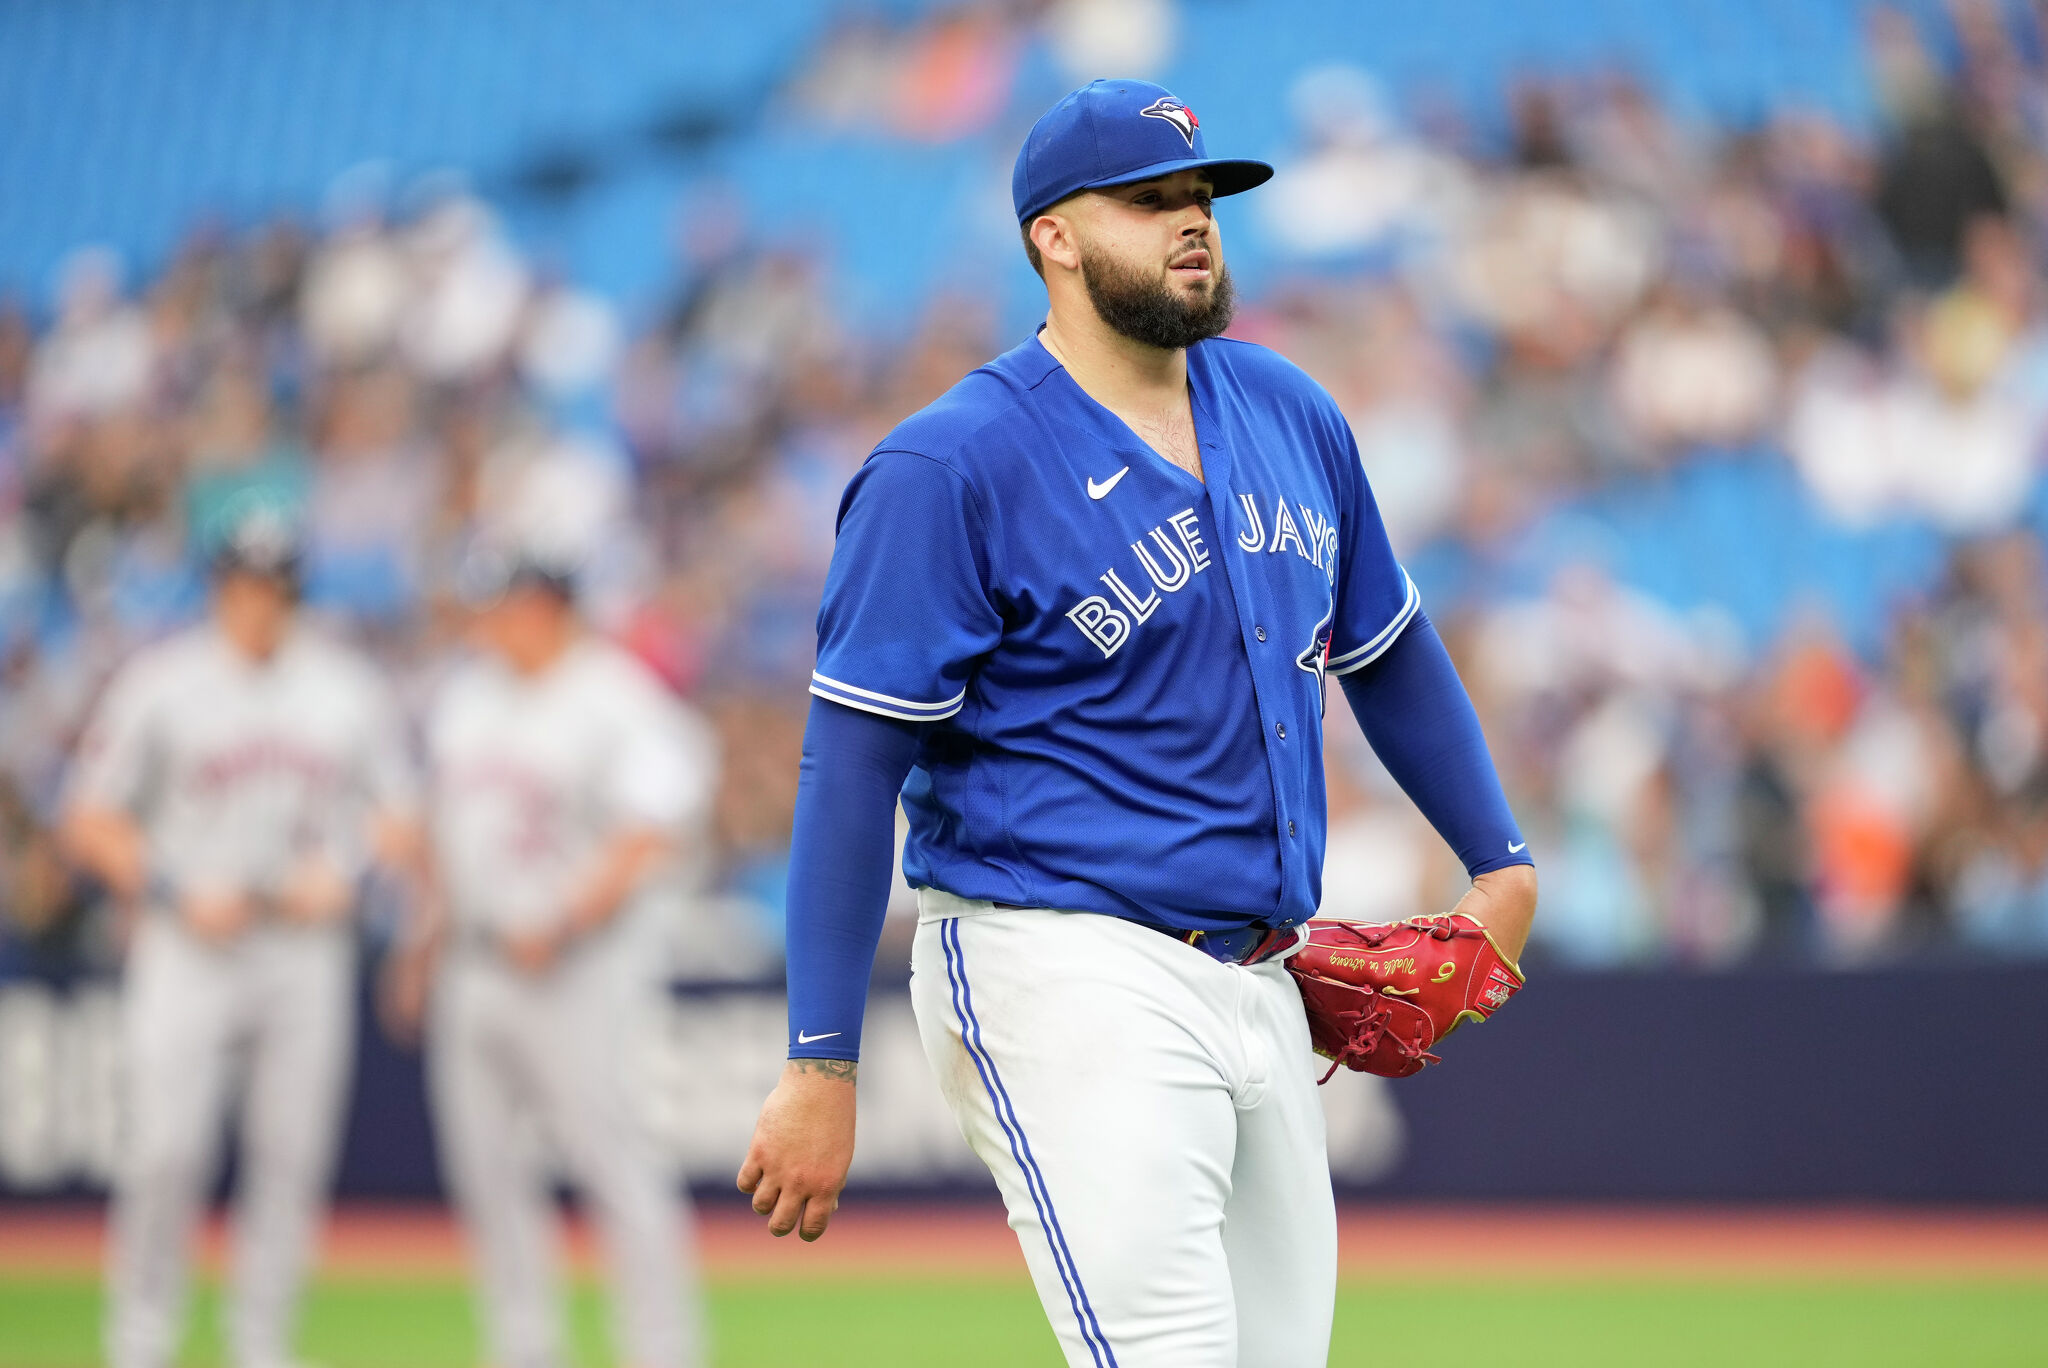 Pitchers gearing up for spots with Jays